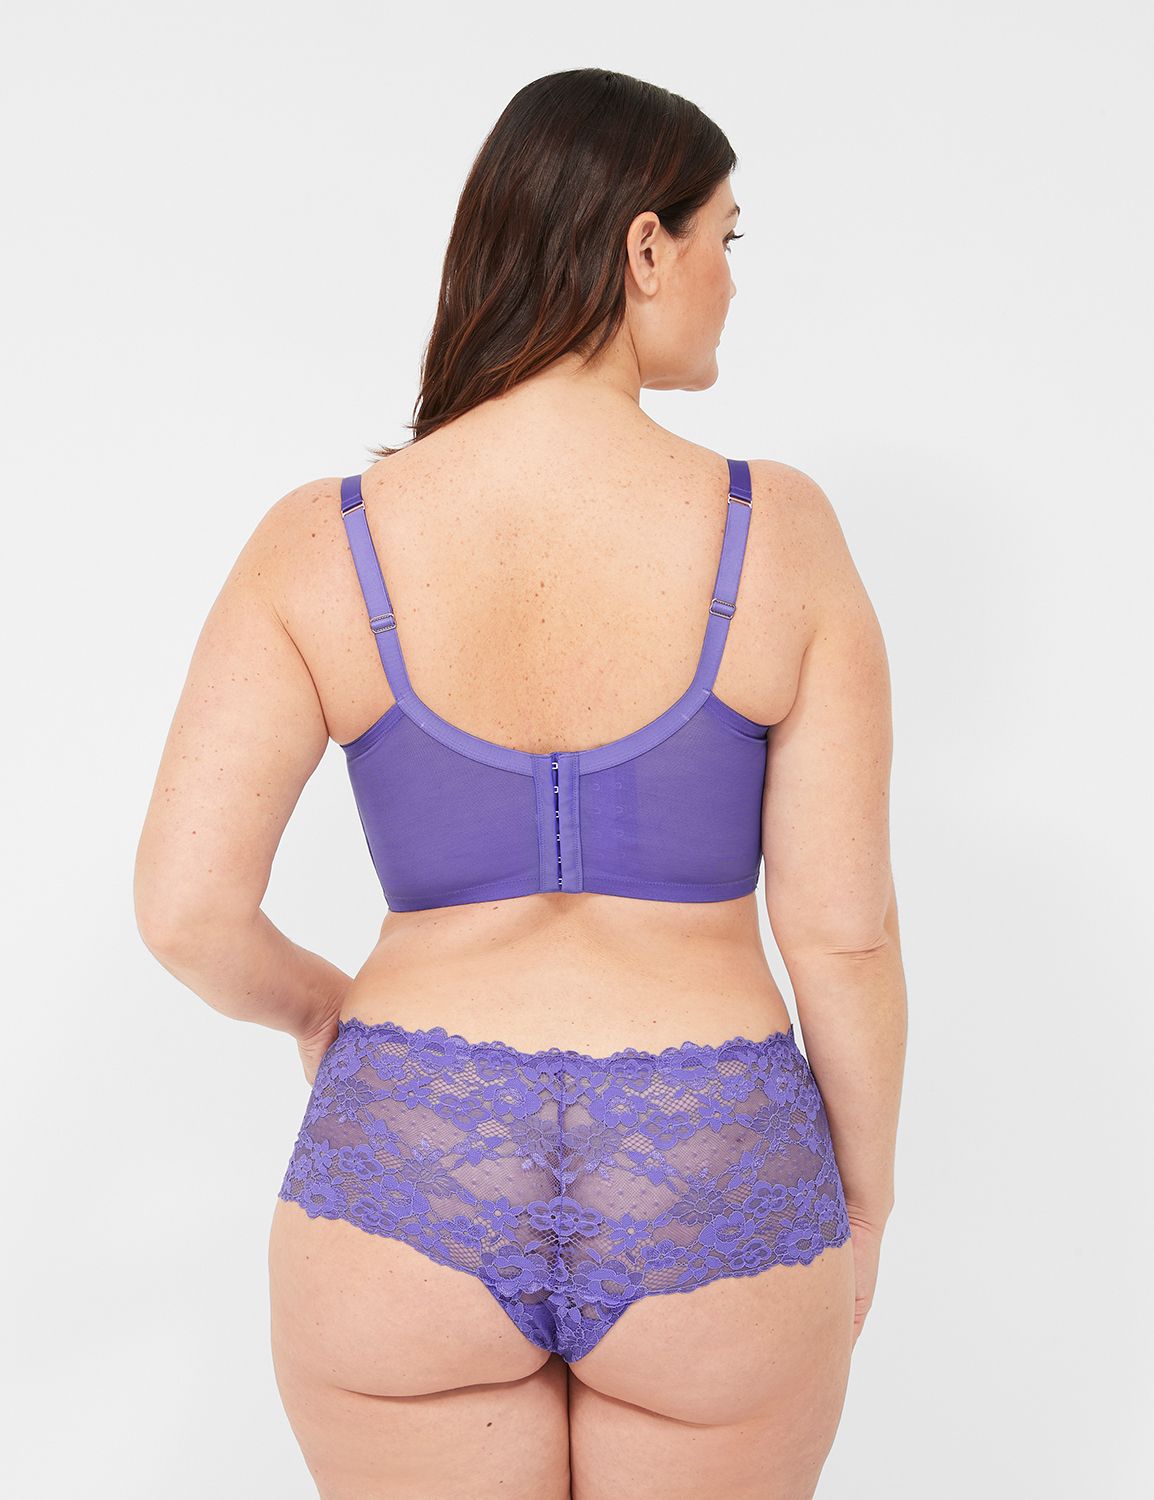  Scyoekwg my order placed by me Plus Size Sexy Lingerie